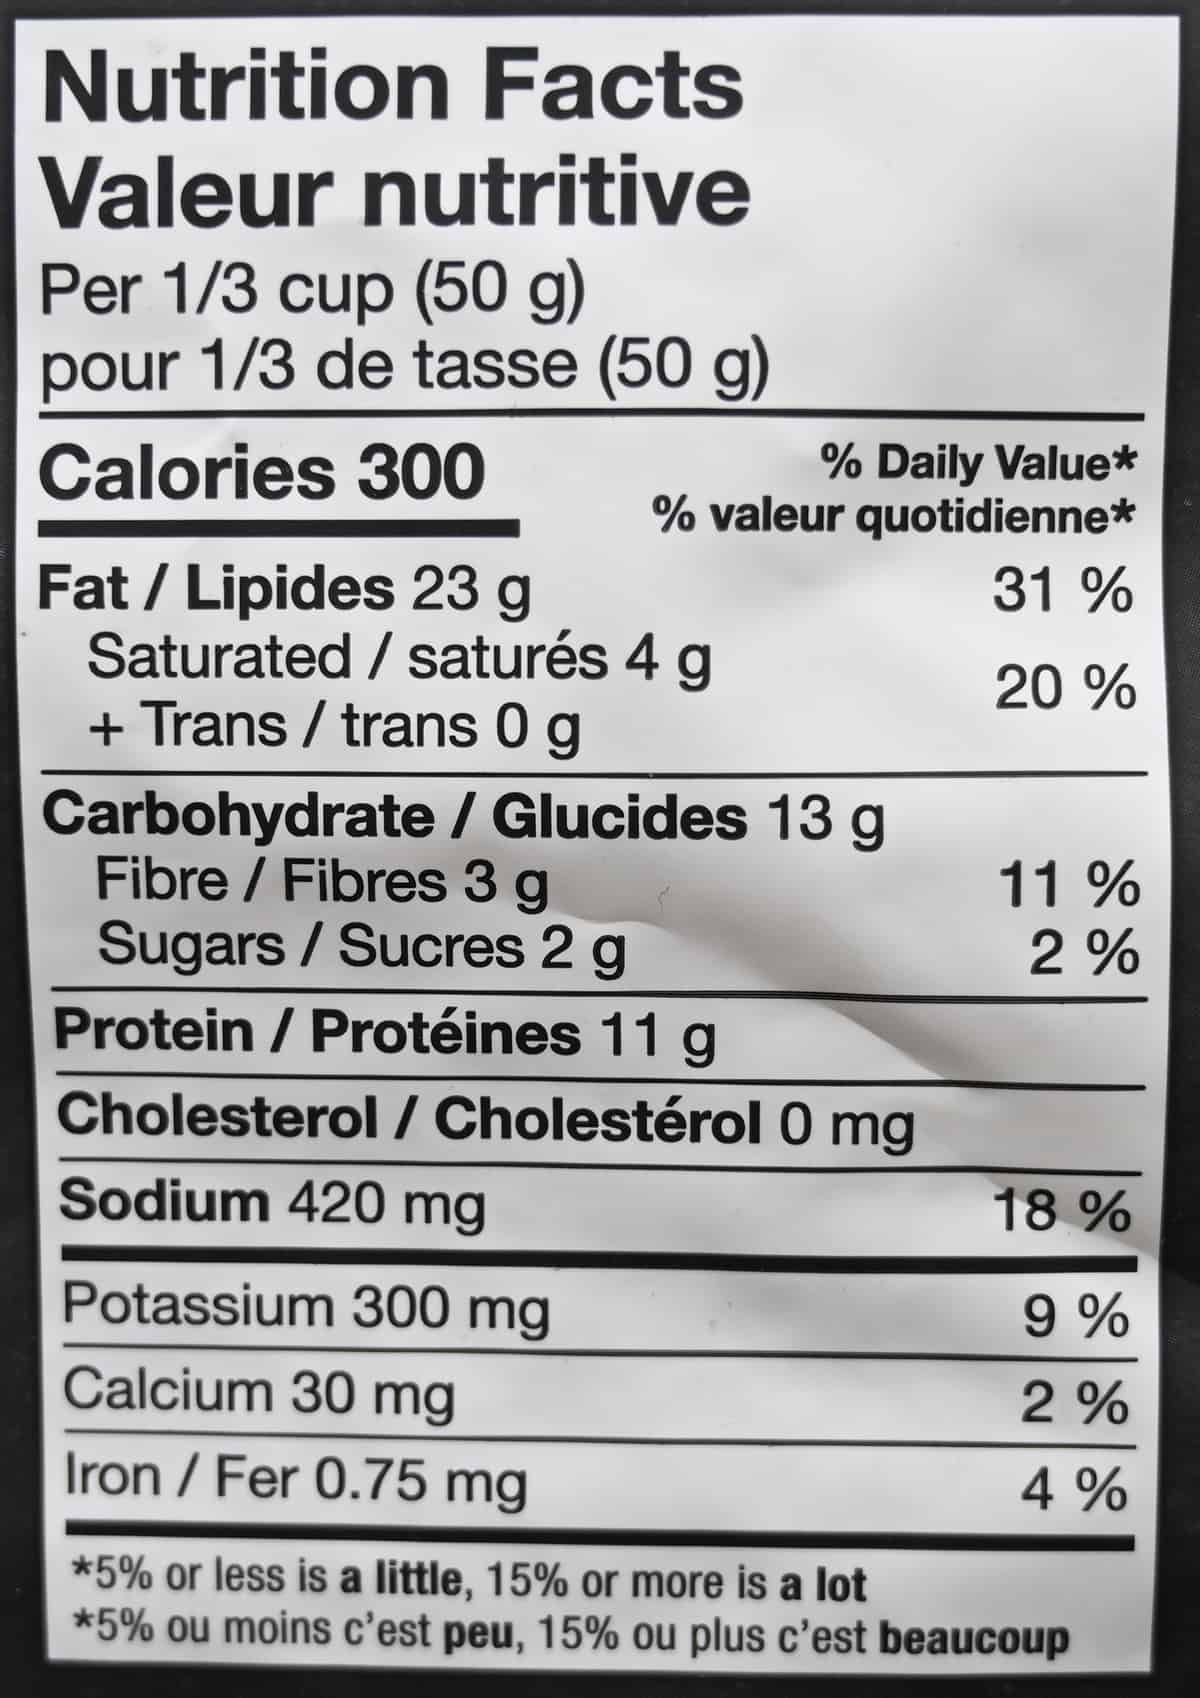 Image of the nutrition facts for the peanuts from the bag.